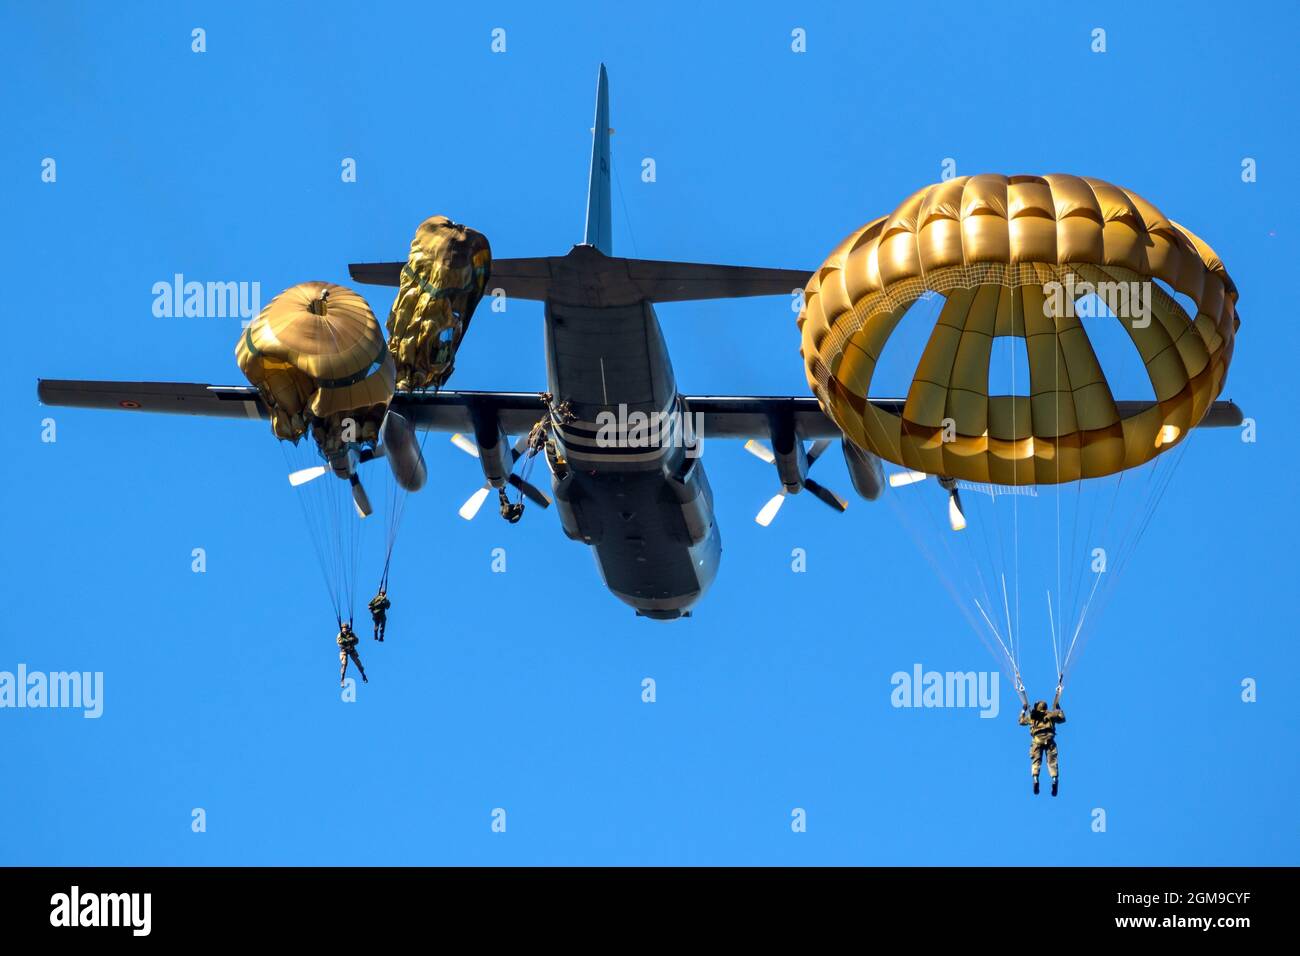 Paratroopers jumping out of a Lockheed Martin C-130 Hercules military aircraft. The Netherlands - September 21, 2019 Stock Photo